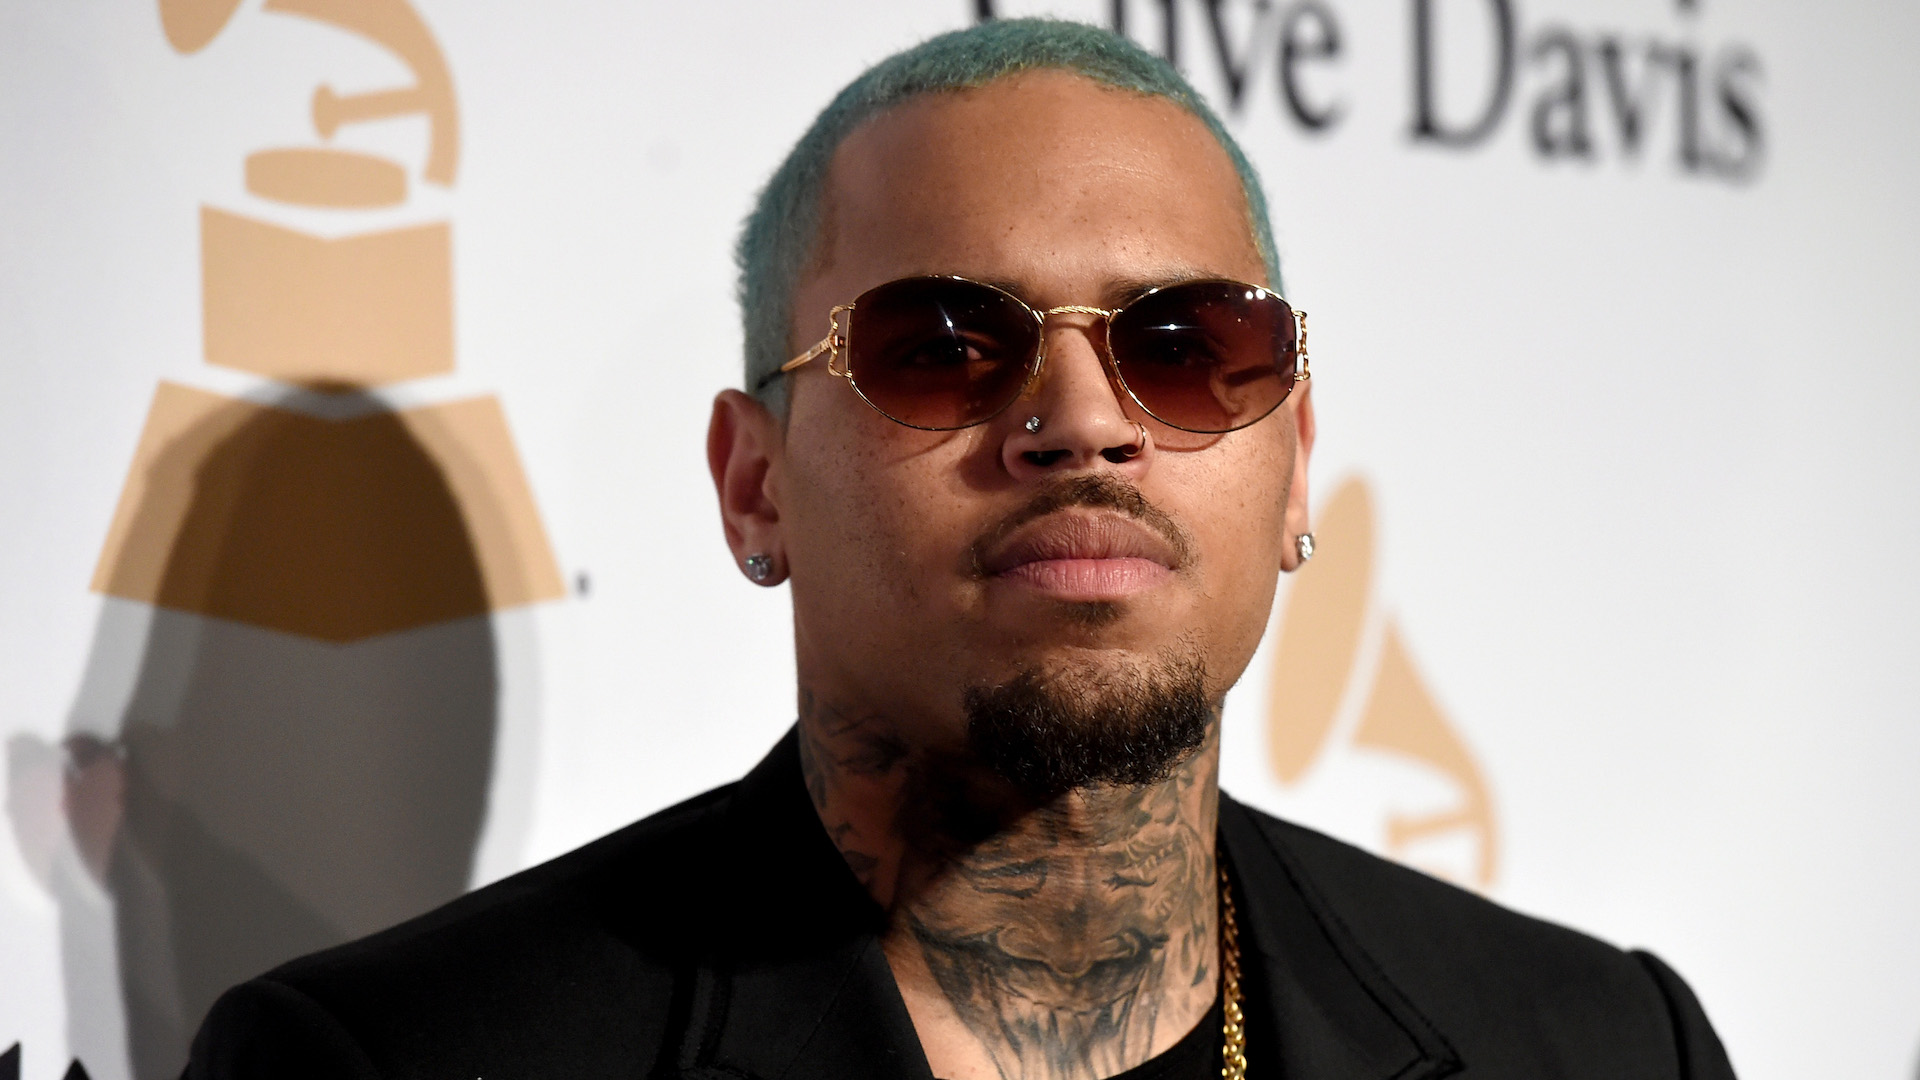 Chris Brown Appears to Respond to Report He’s Being Investigated After Woman Accuses Him of Slapping Her